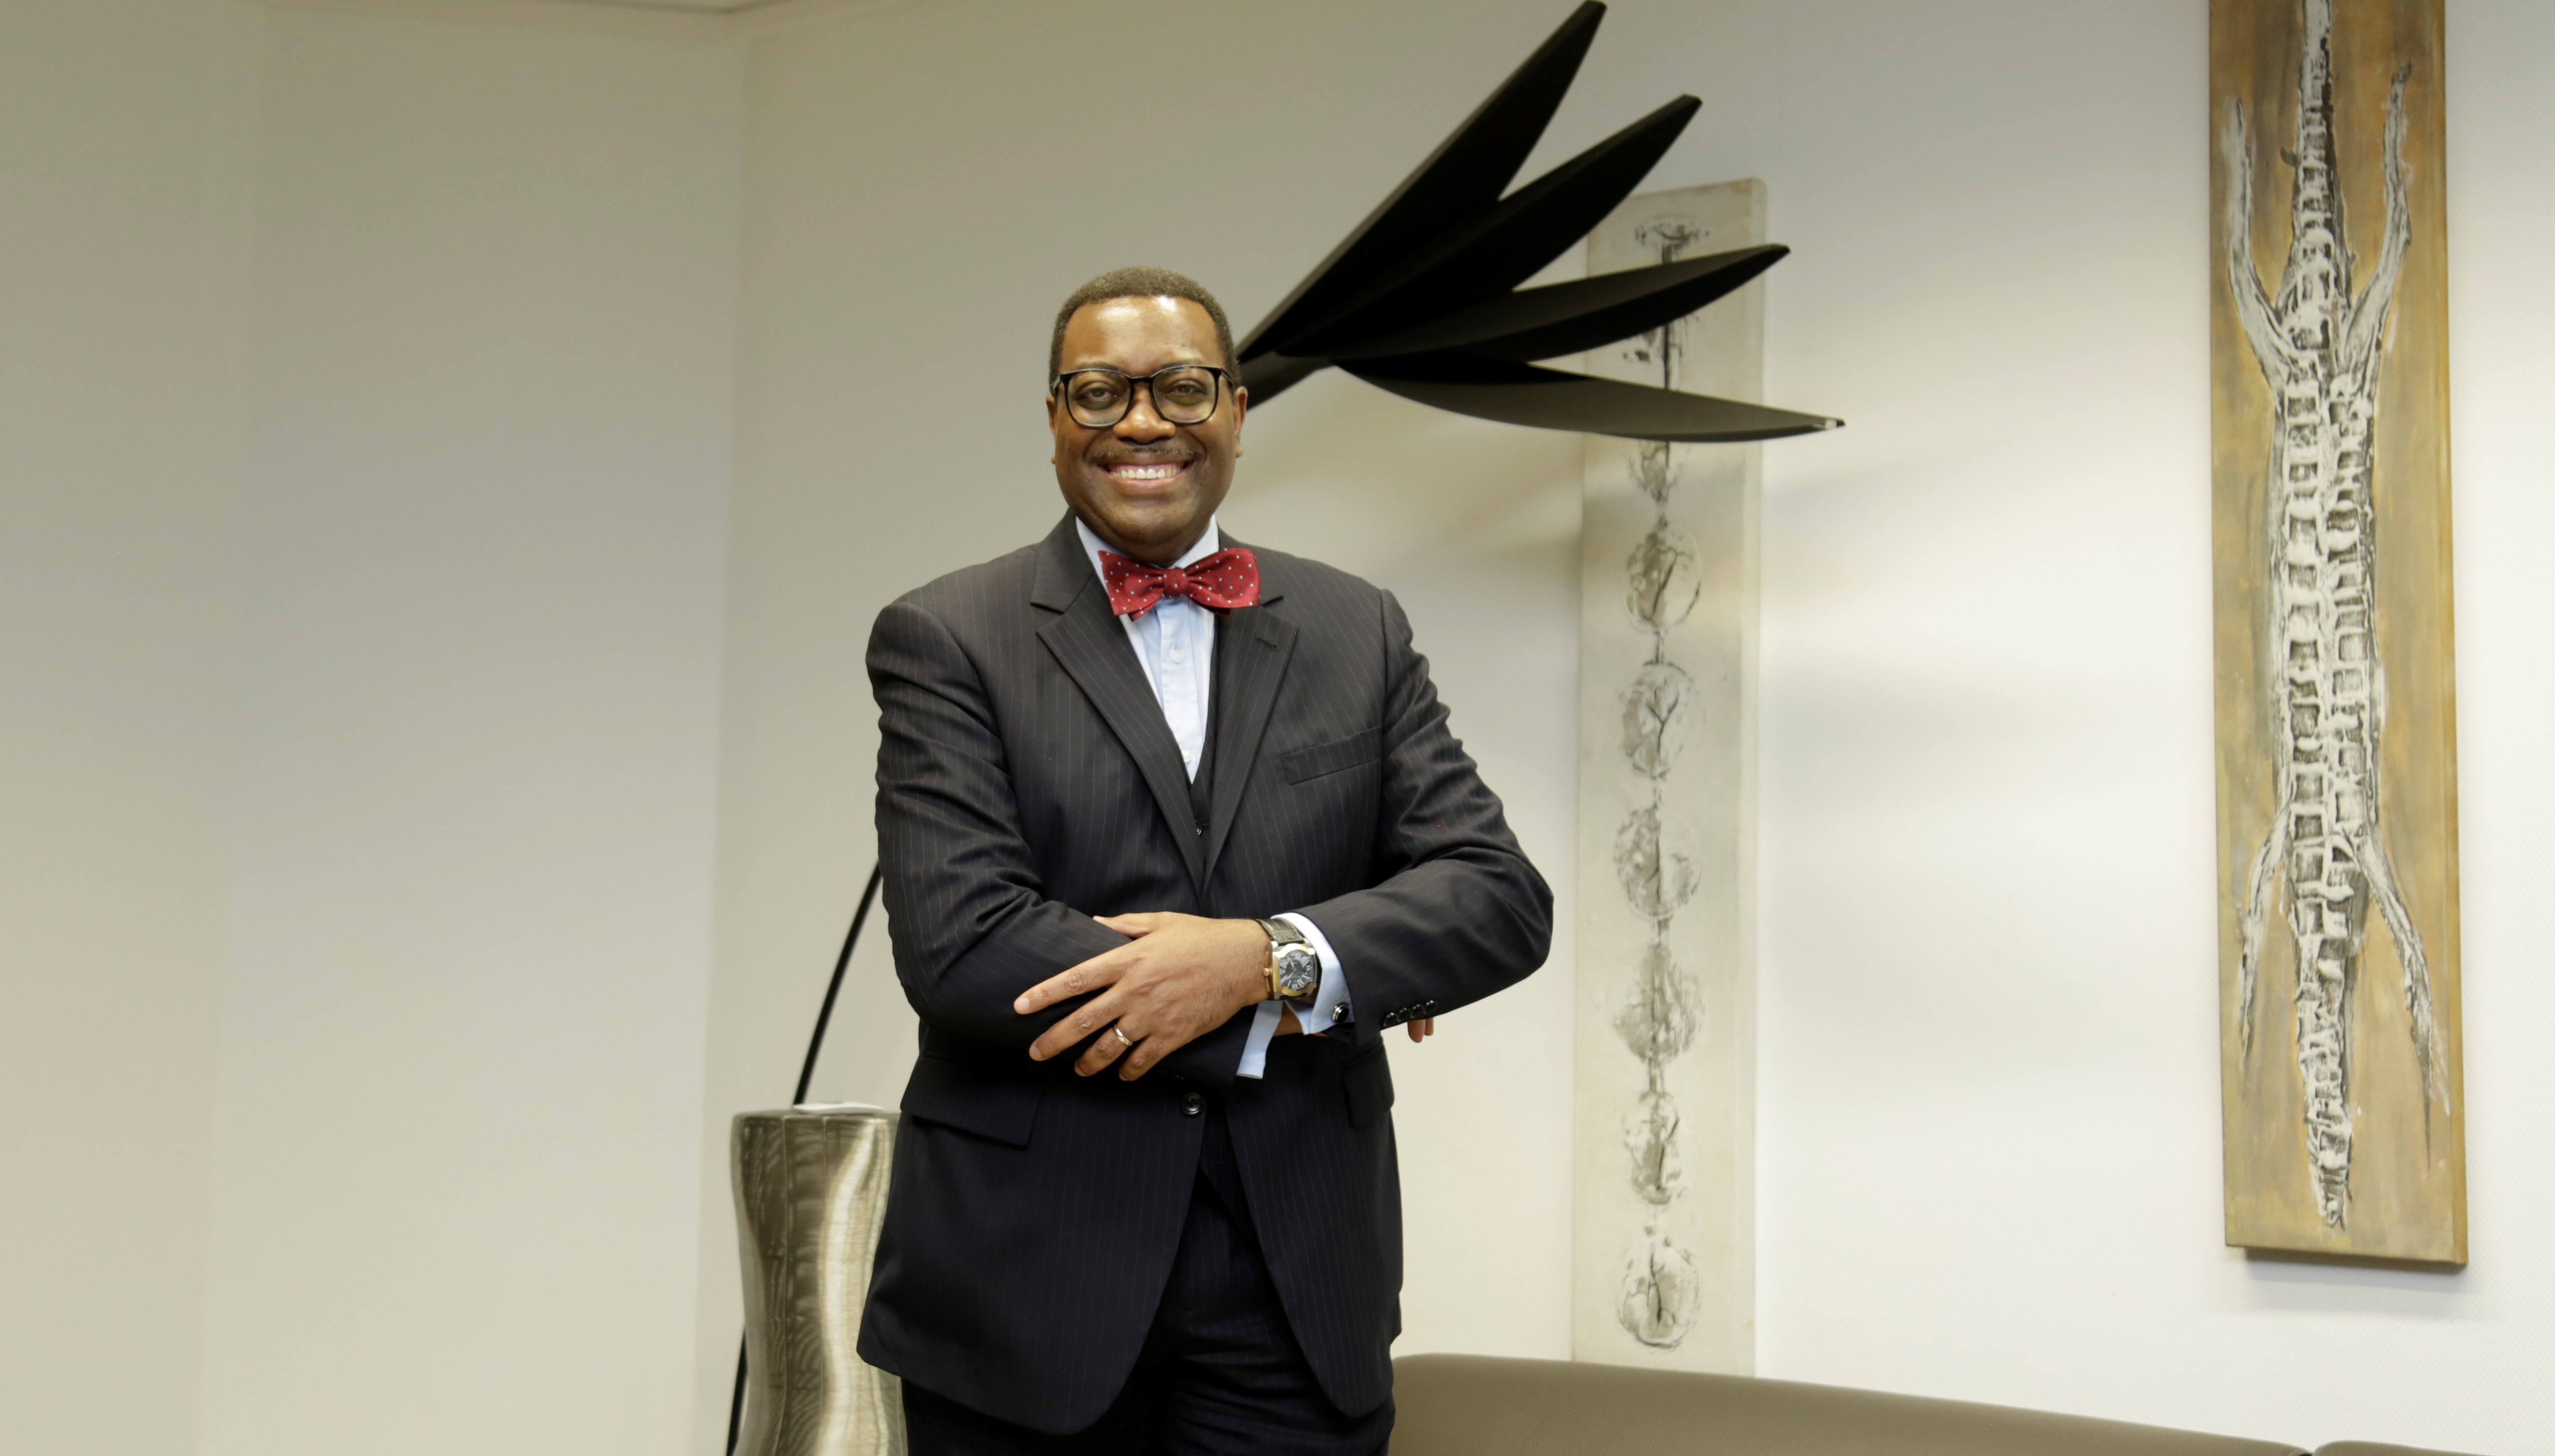 Adesina – The Strength of Personal Conviction under fire